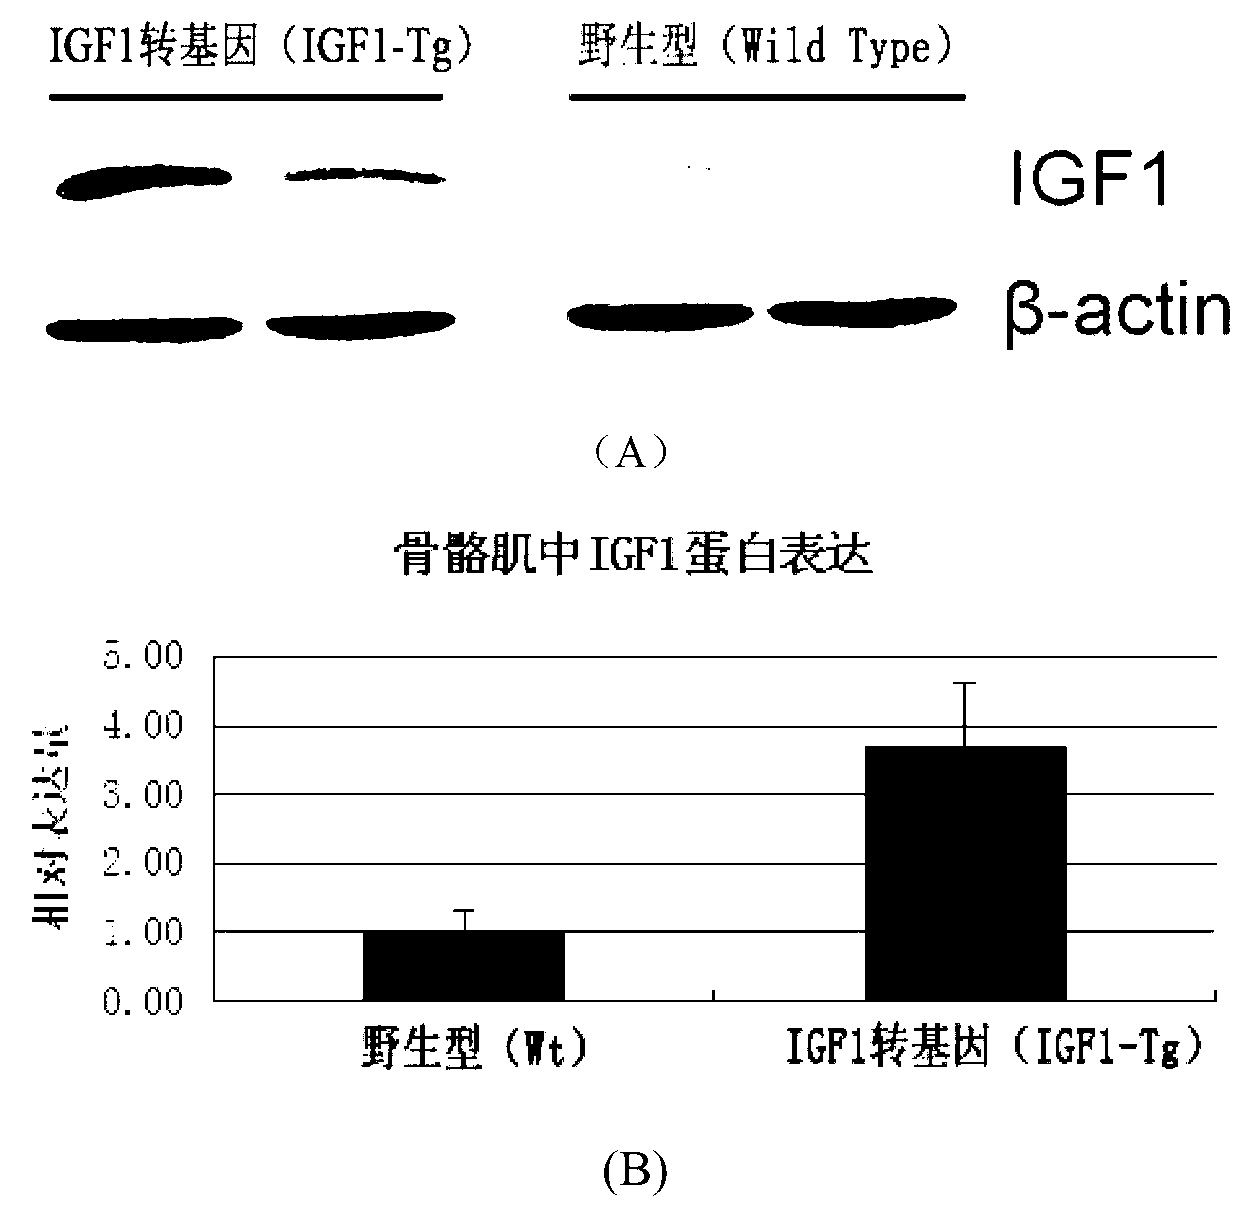 Over-expression vector for muscle specific expression of pig IGF1 gene